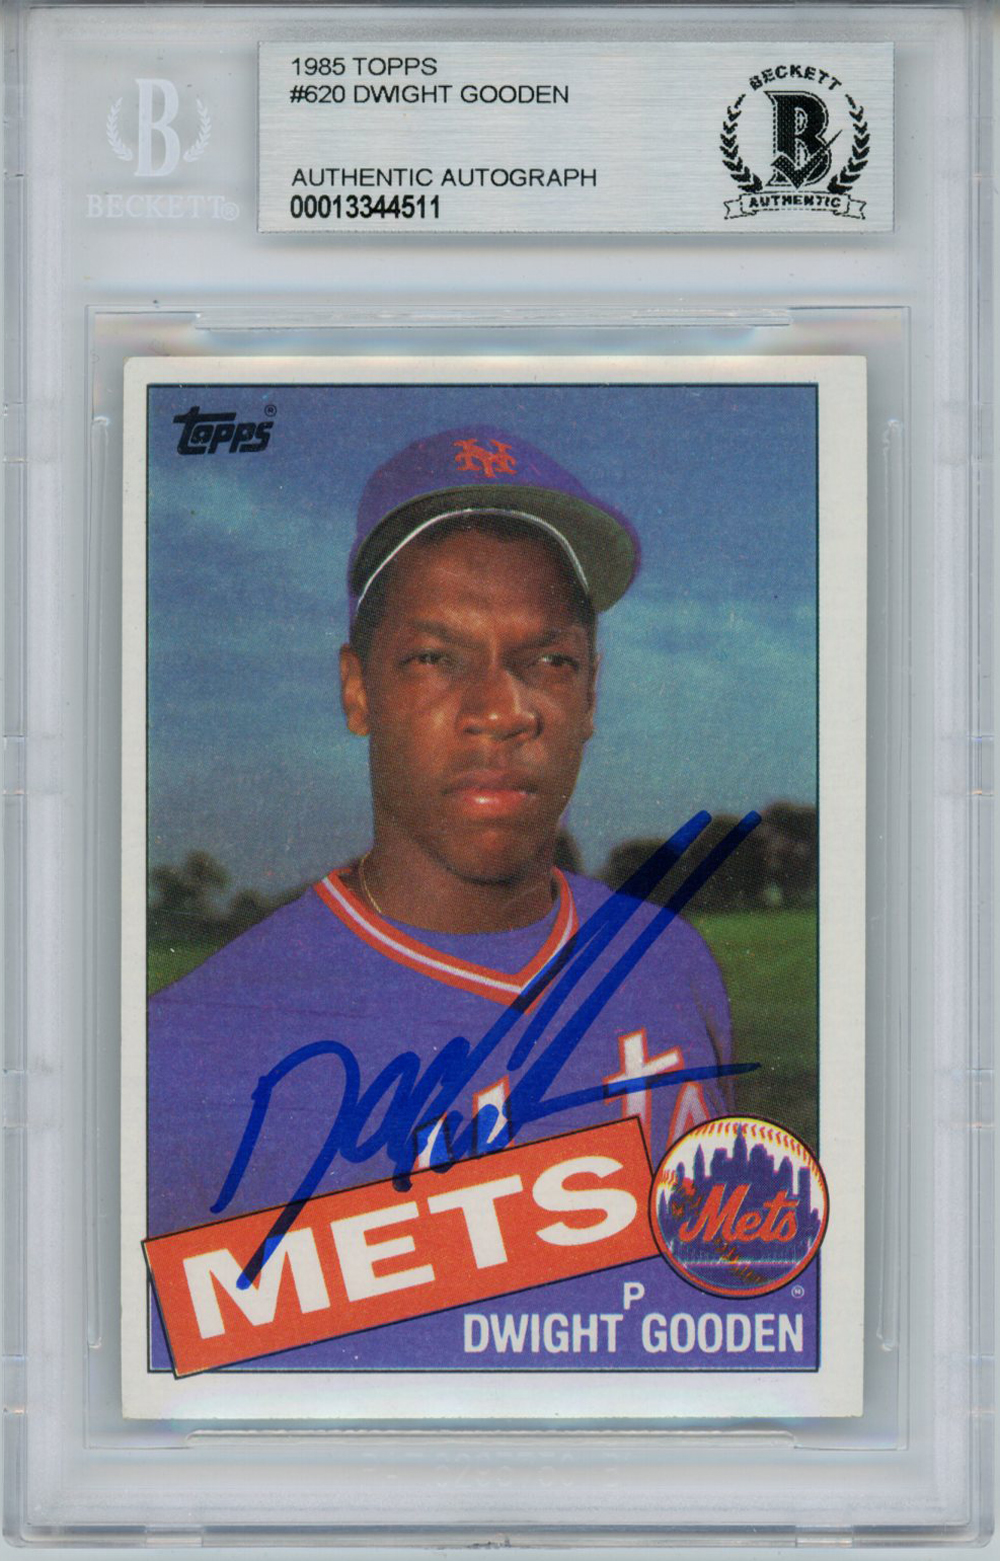 Dwight Gooden Autographed 1985 Topps Rookie Trading Card BAS Slab